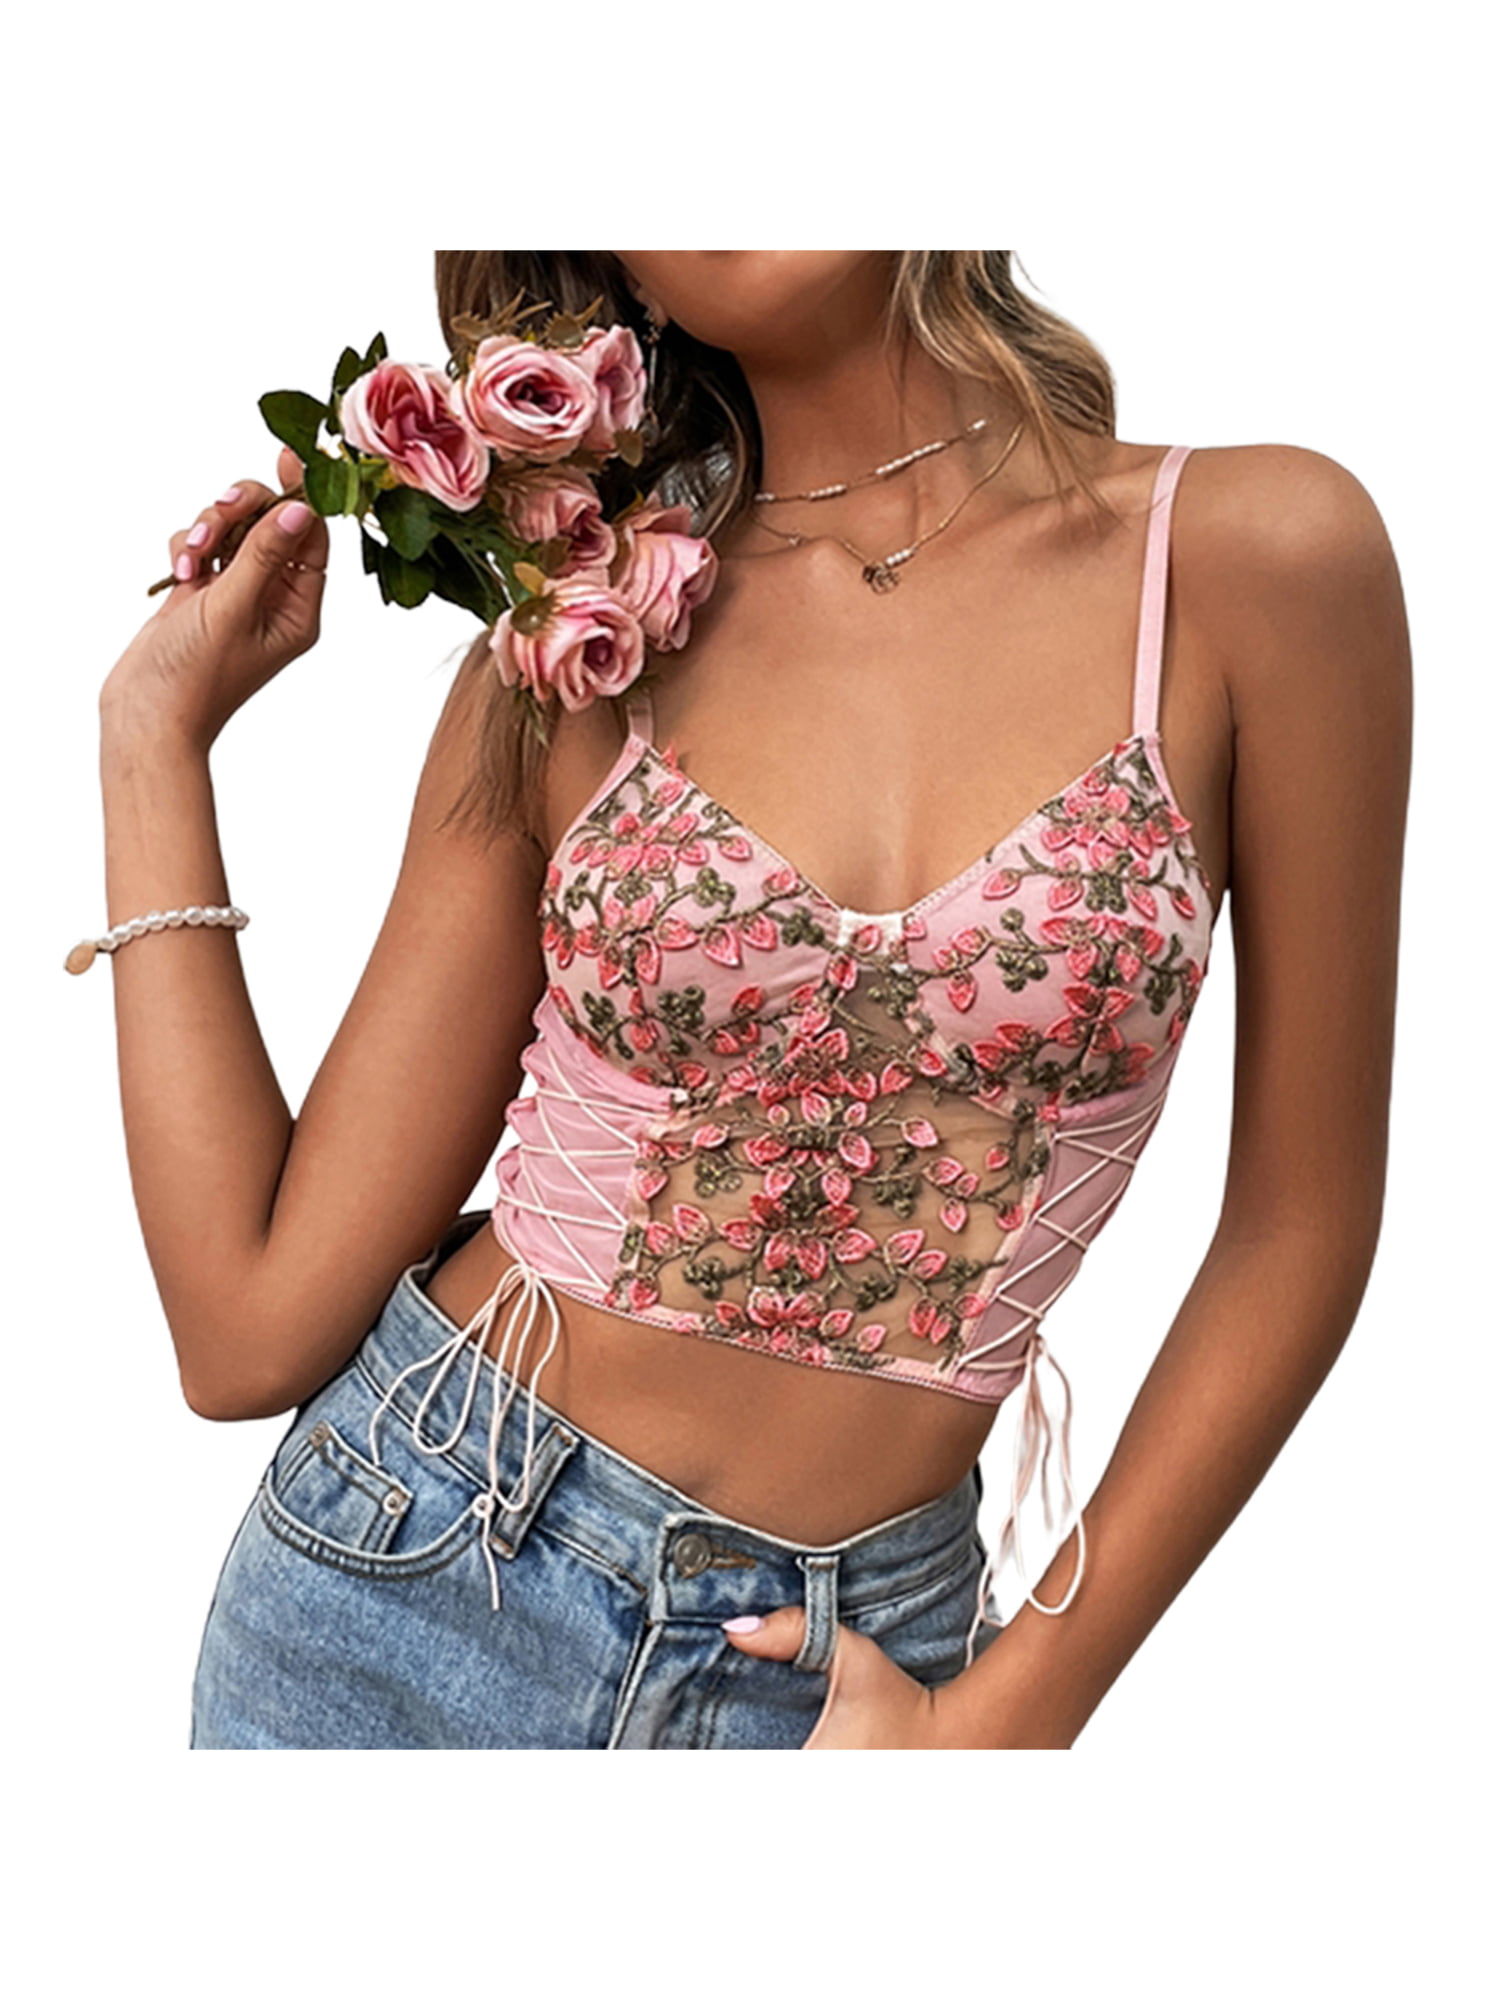 Canrulo Women Lace Corset Crop Top Push Up Bustier Floral Top Cami